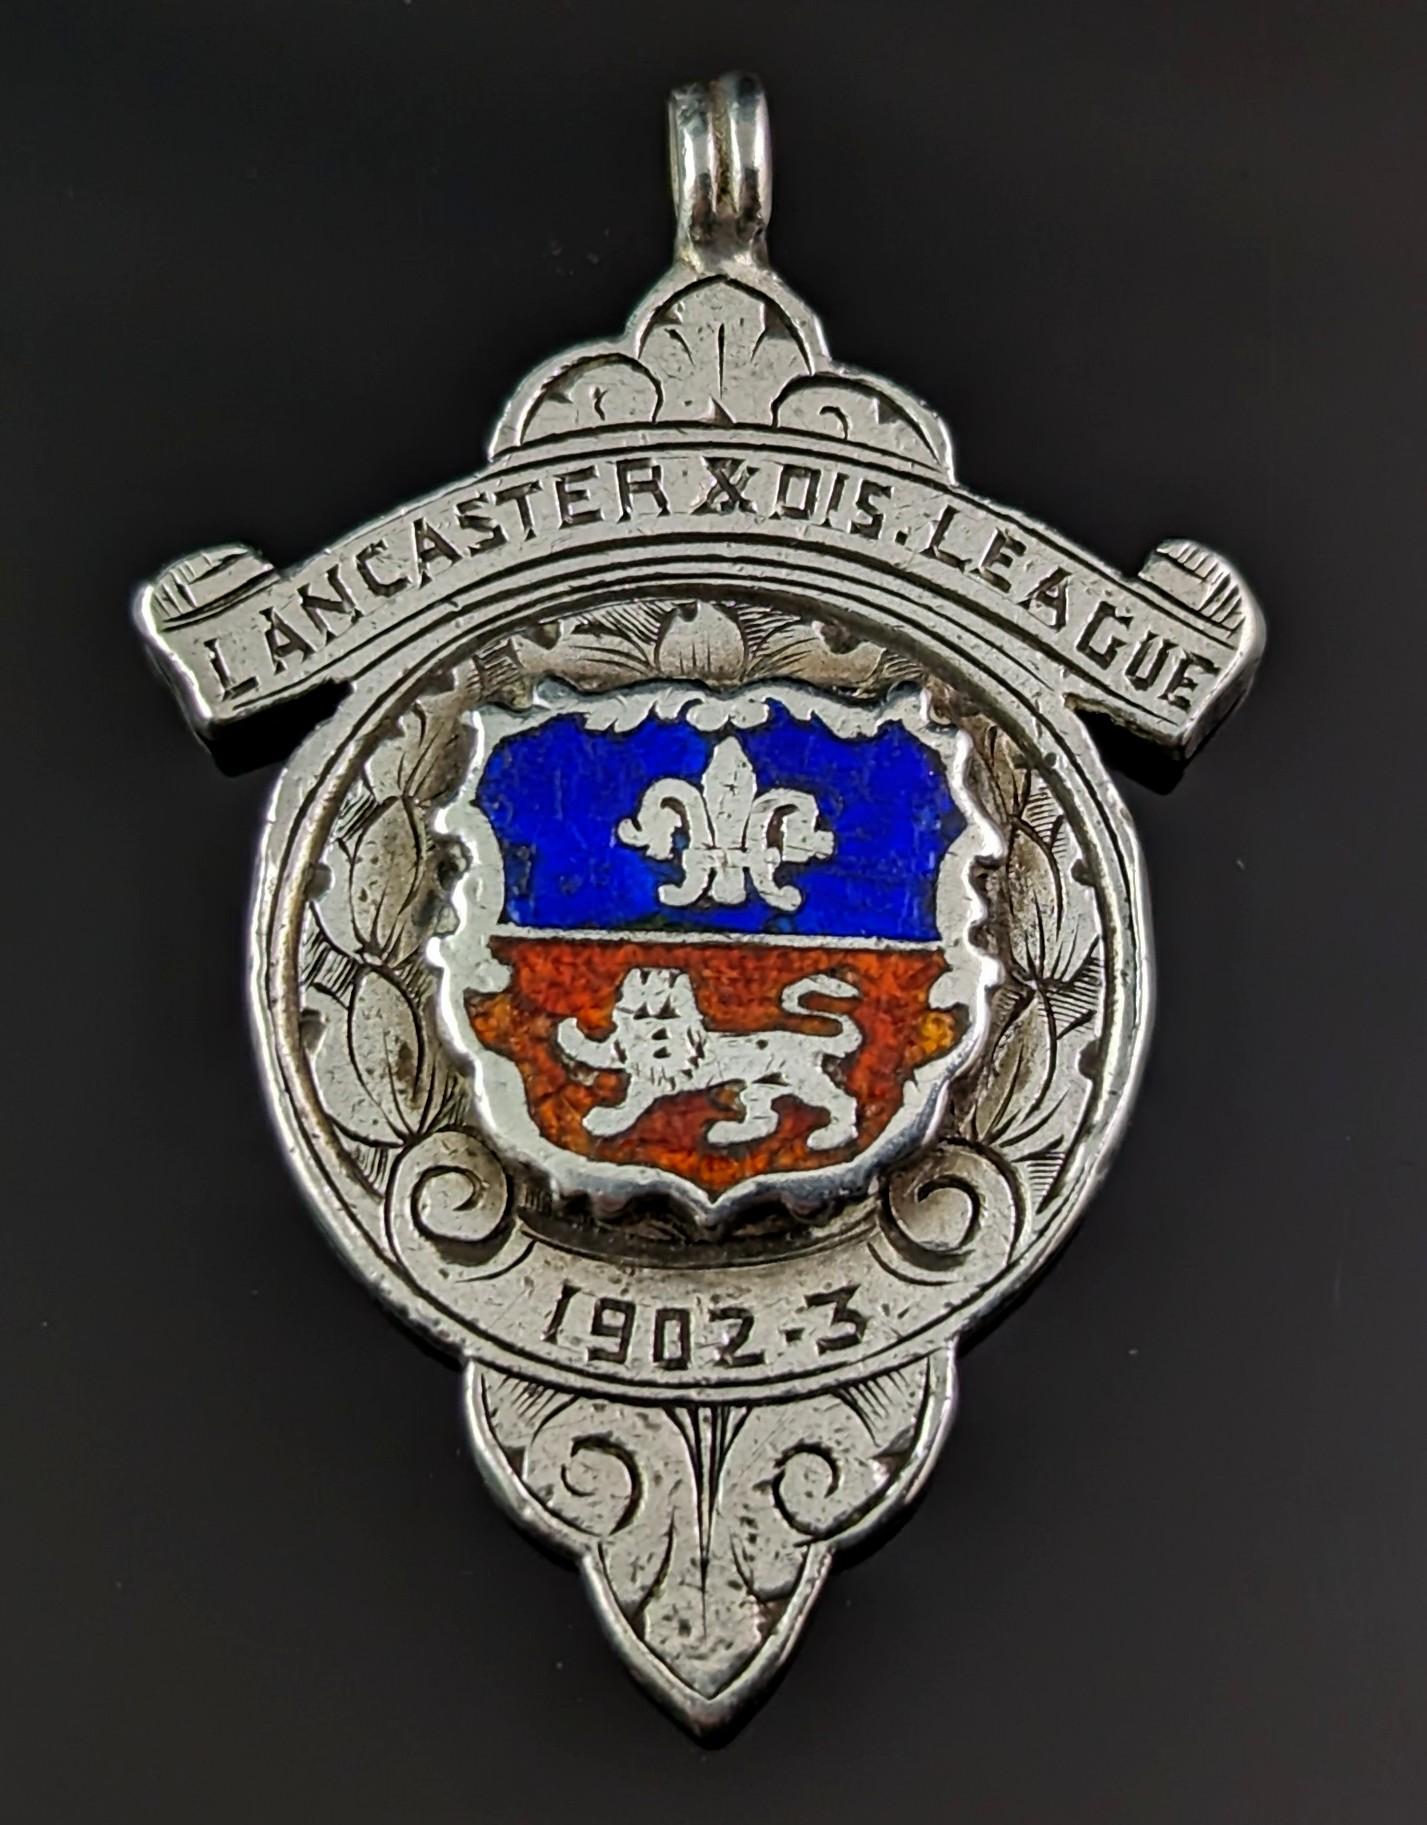 An attractive vintage sterling silver and enamel fob pendant.

It is an interestingly shaped piece with a central enamelled design in rich blue and red, highlighting a Fleur de Lis and a lion.

It reads Lancaster Dis. League, 1902 - 3.

The fob has